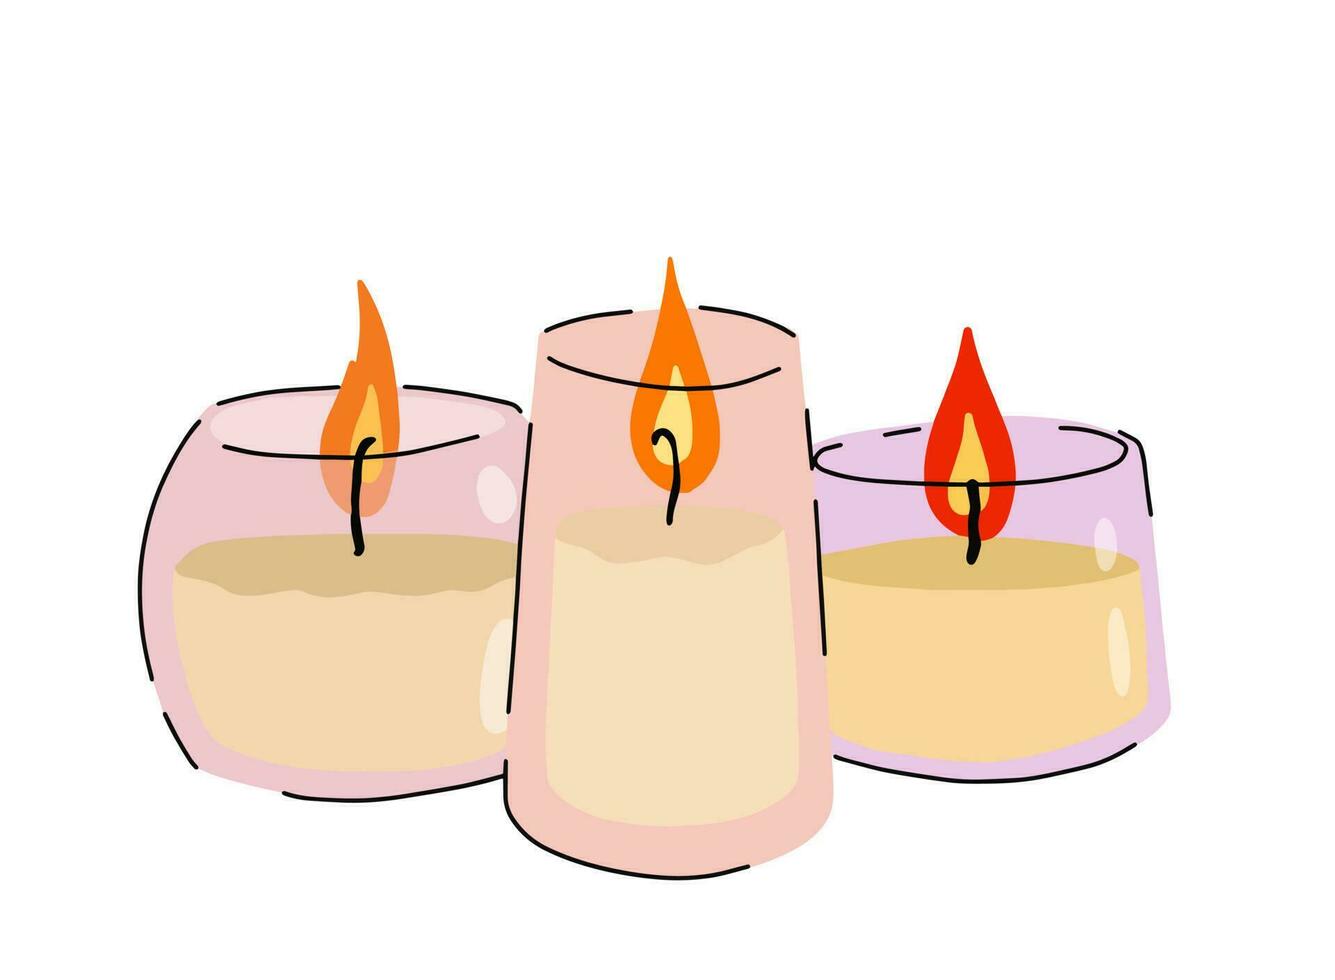 Scented candles in glass jar. Set of Romantic Flame and fire in decorative glass. Doodle cartoon isolated on white background vector